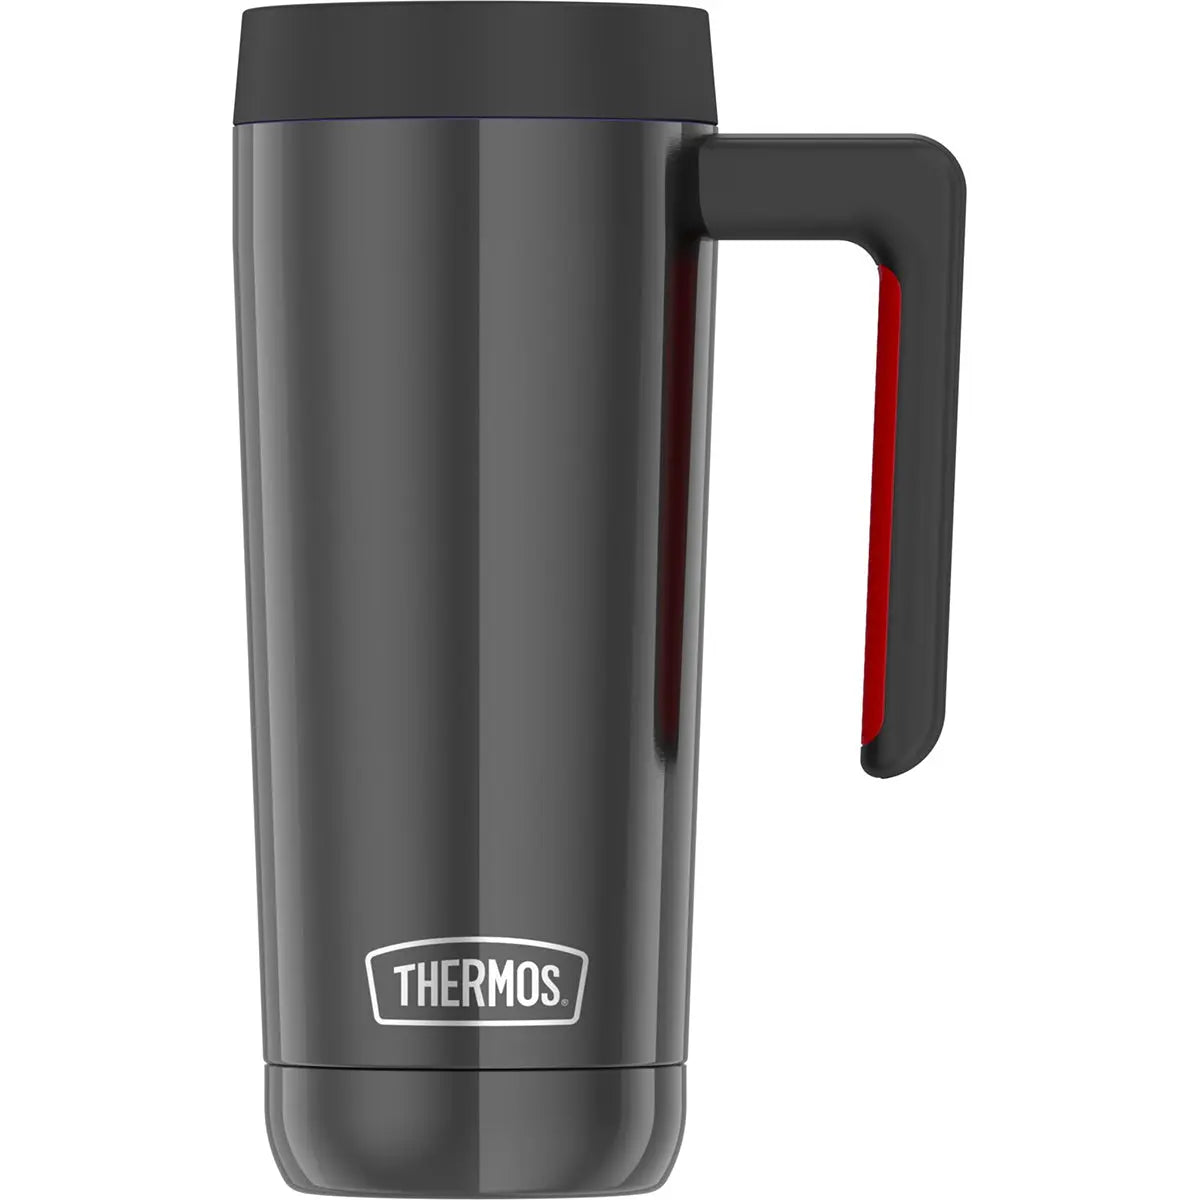 Thermos 18 oz. Vacuum Insulated Stainless Steel Travel Mug Thermos